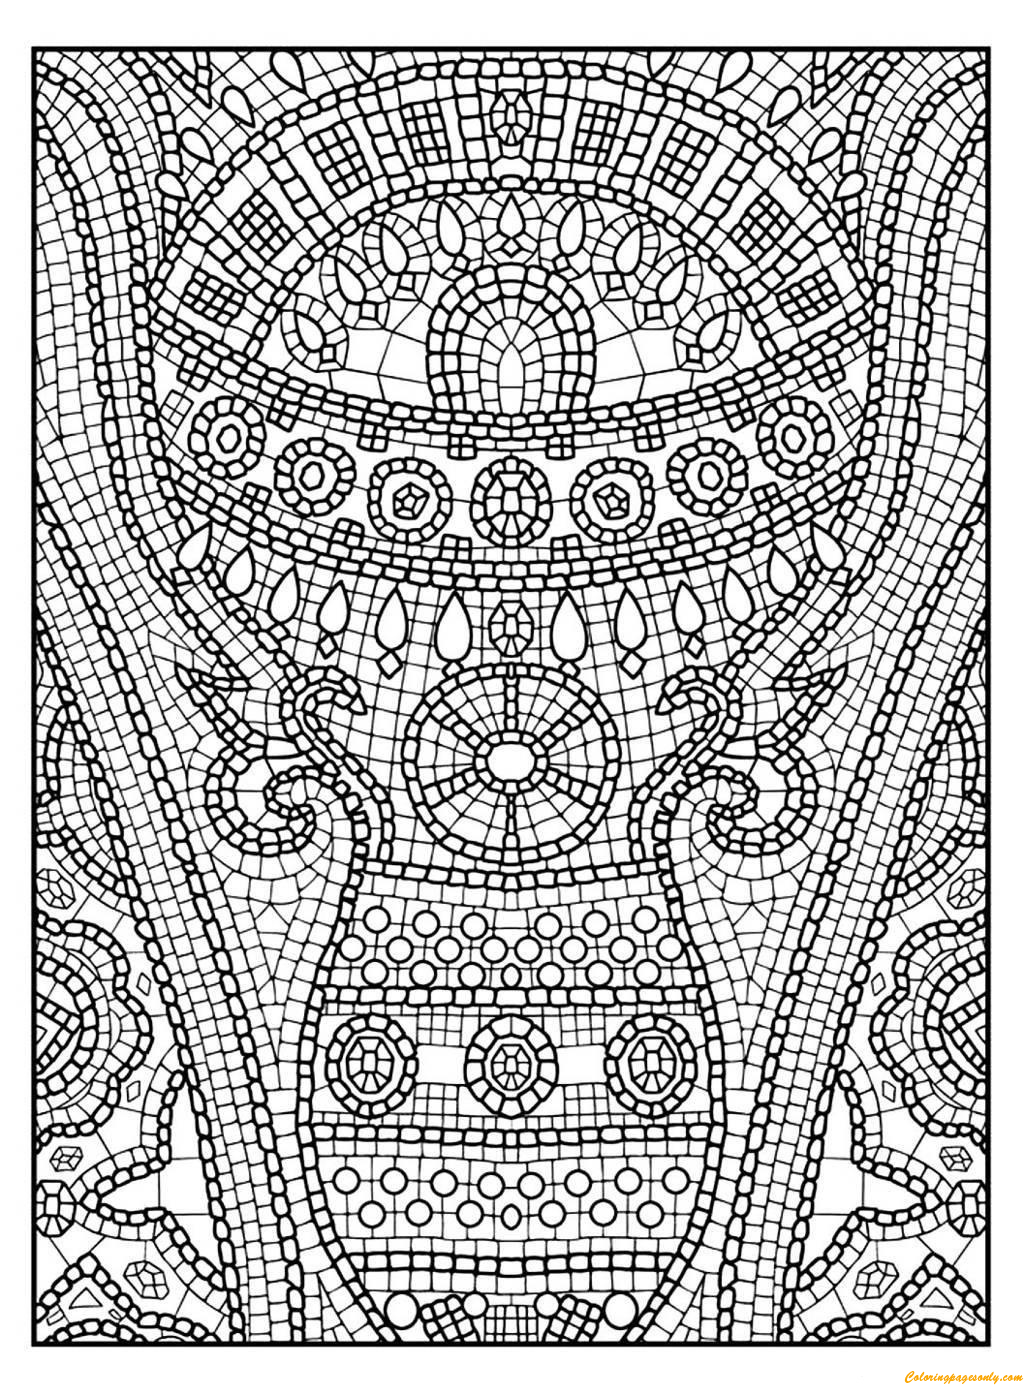 Mosaic Patterns Coloring Page - Free Coloring Pages Online